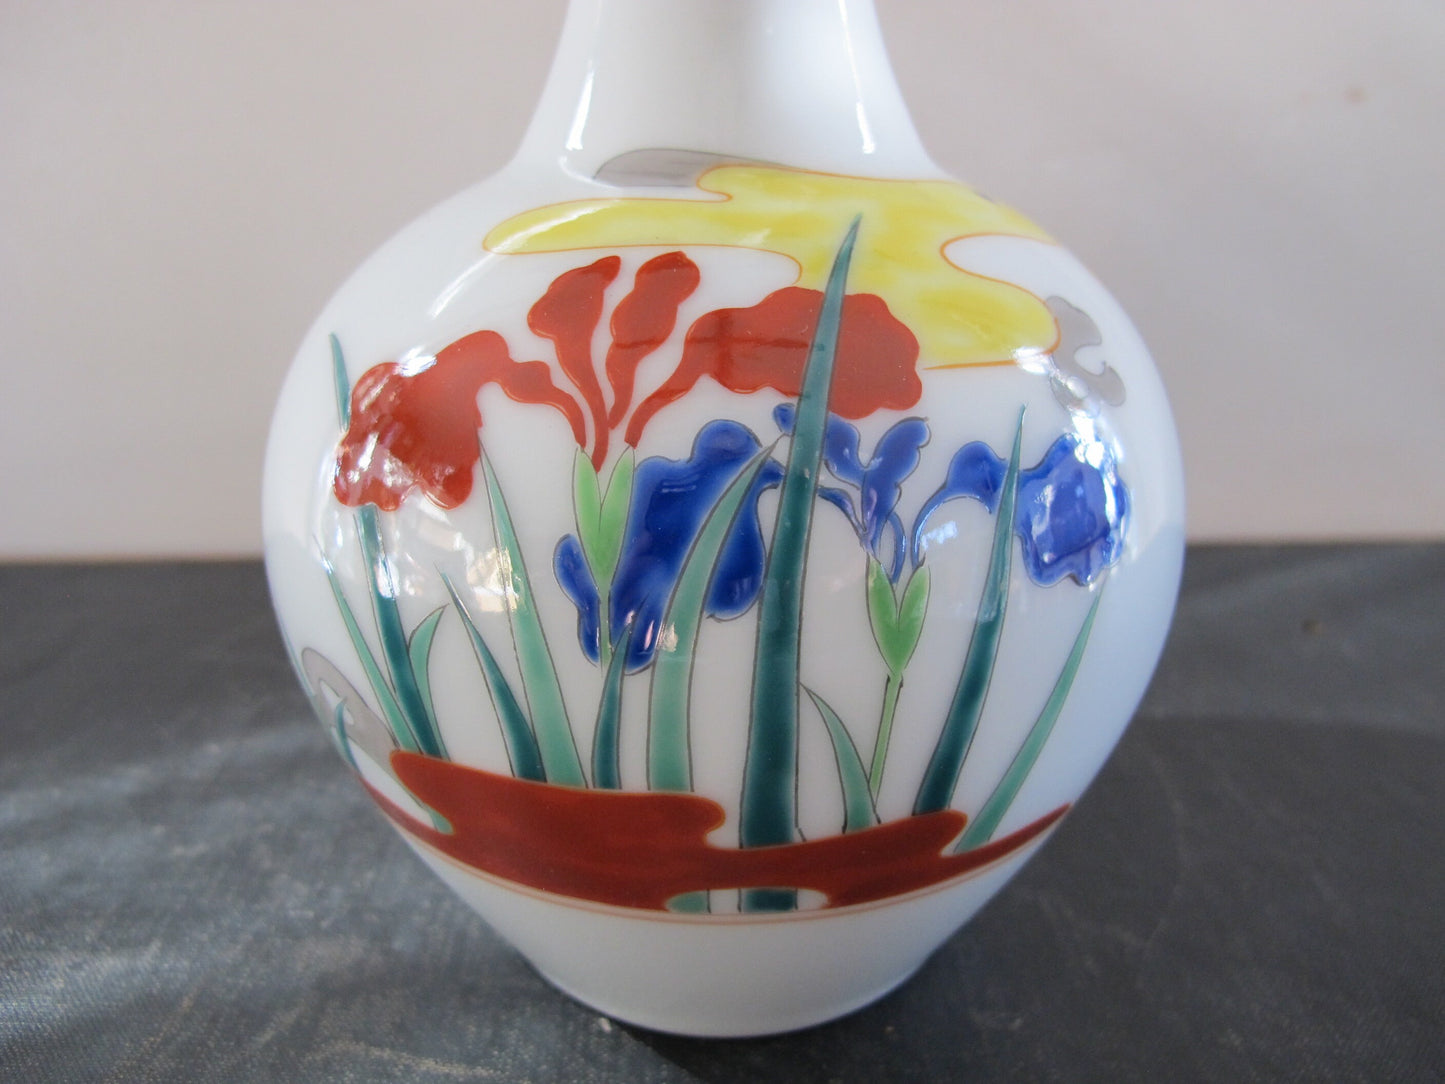 Vase Japanese Signed Marked Mount Fuji Iris Blue and Red with Yellow Cloud Form Entirely Handpainted